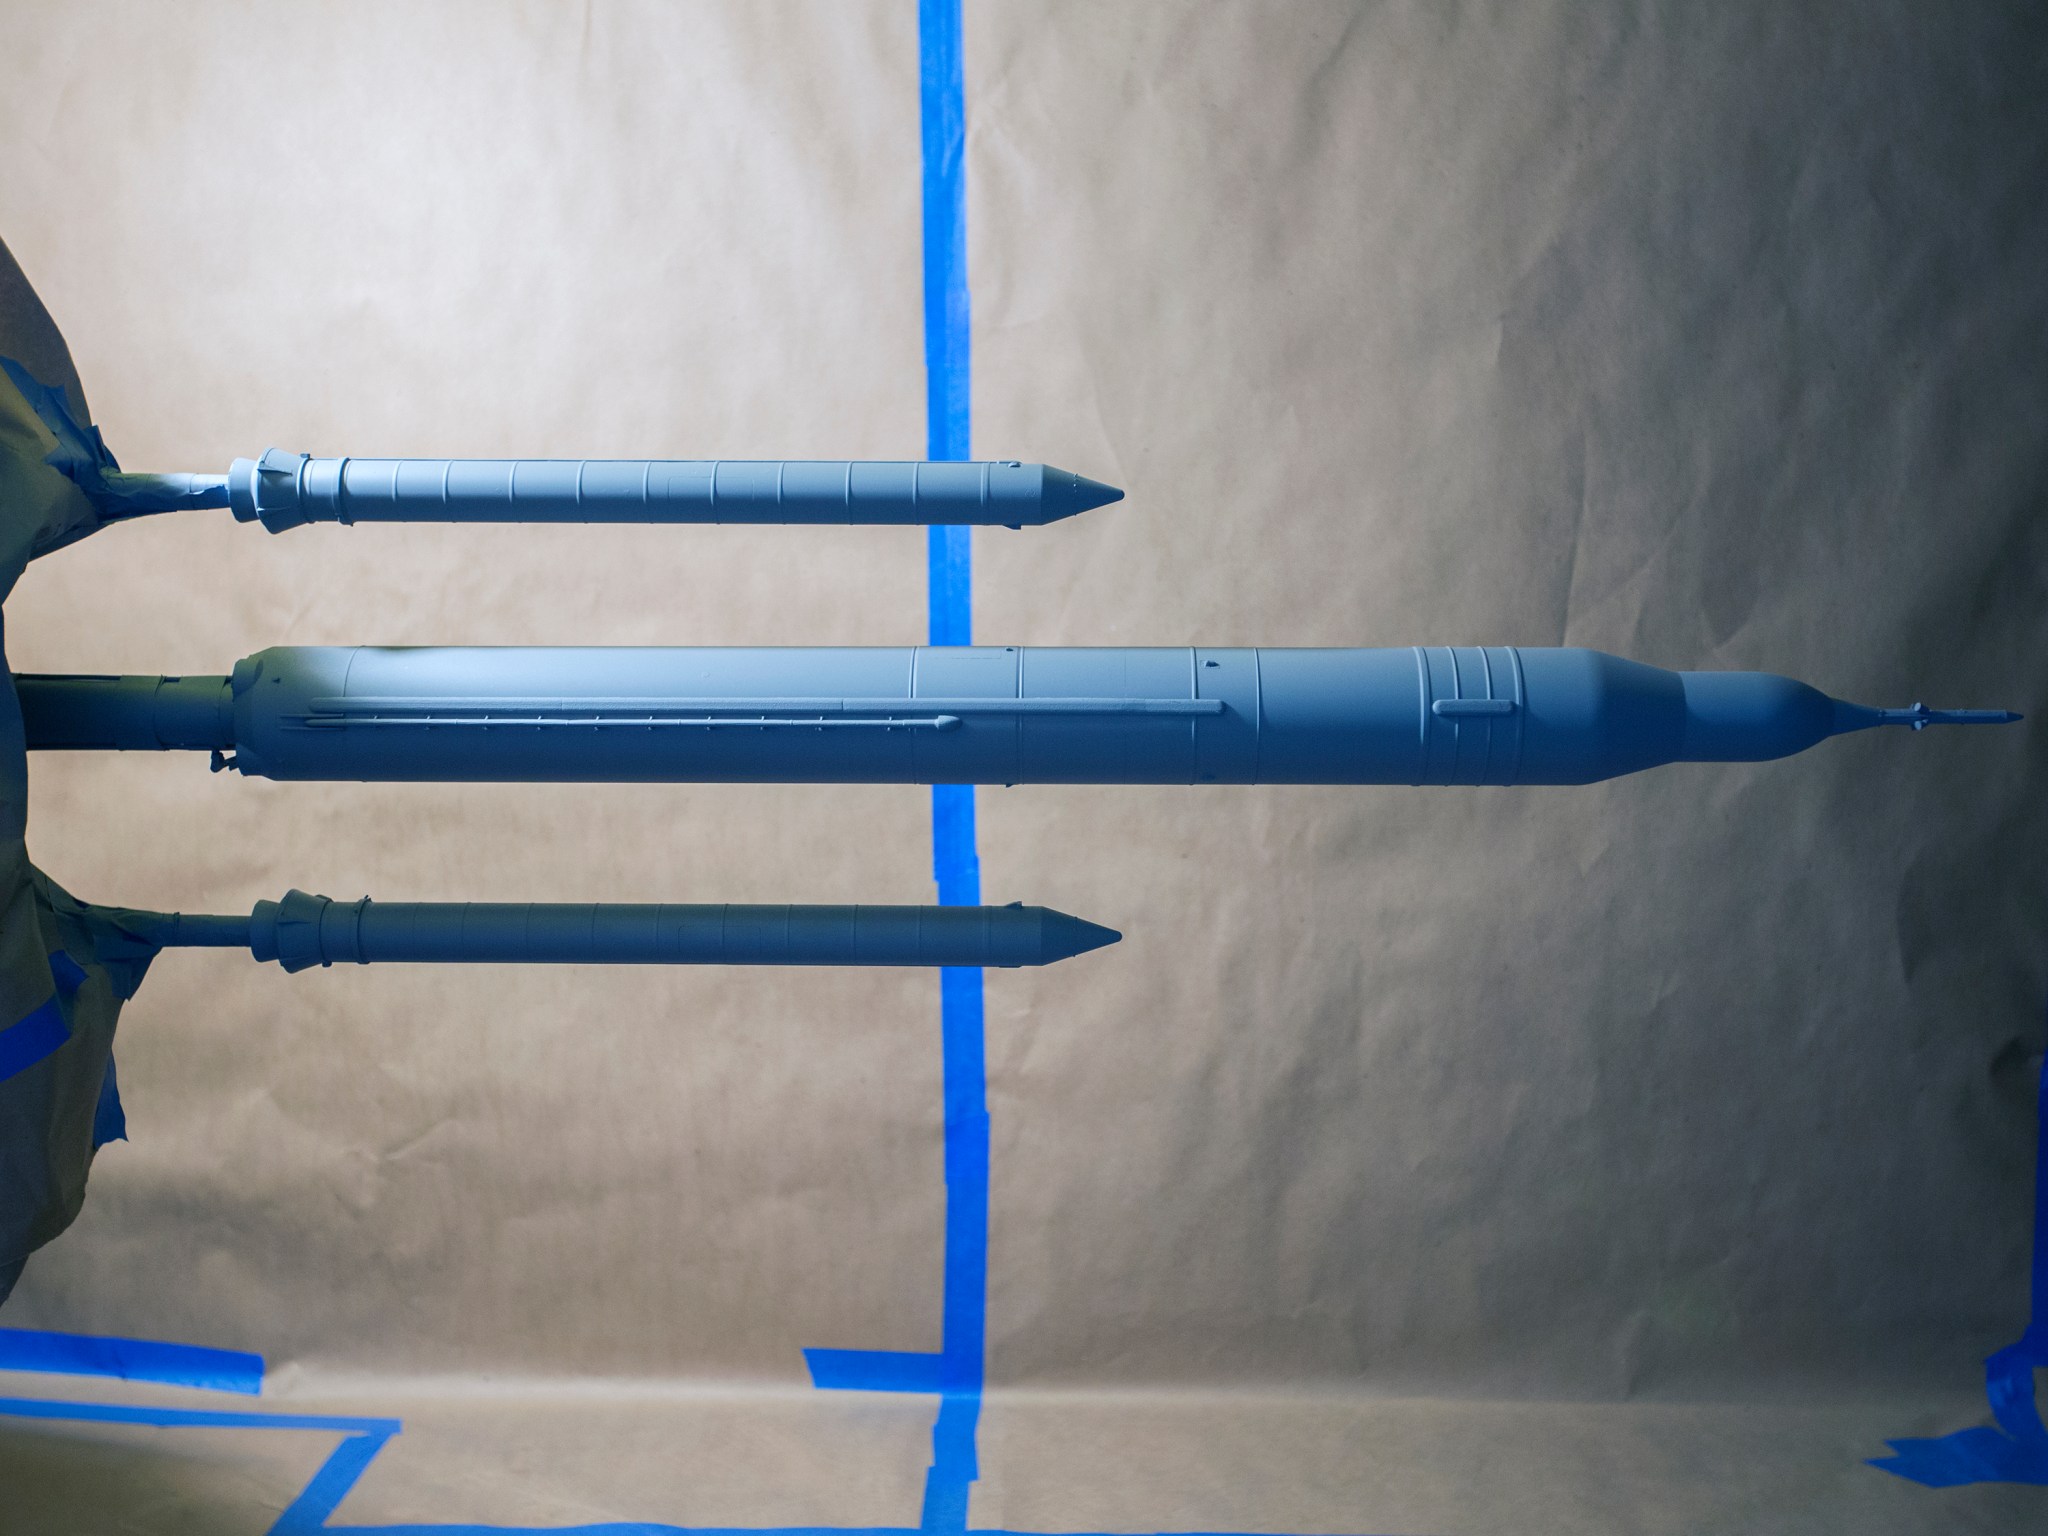 A scaled model of the Space Launch System outfitted with its pressure-sensitive paint.